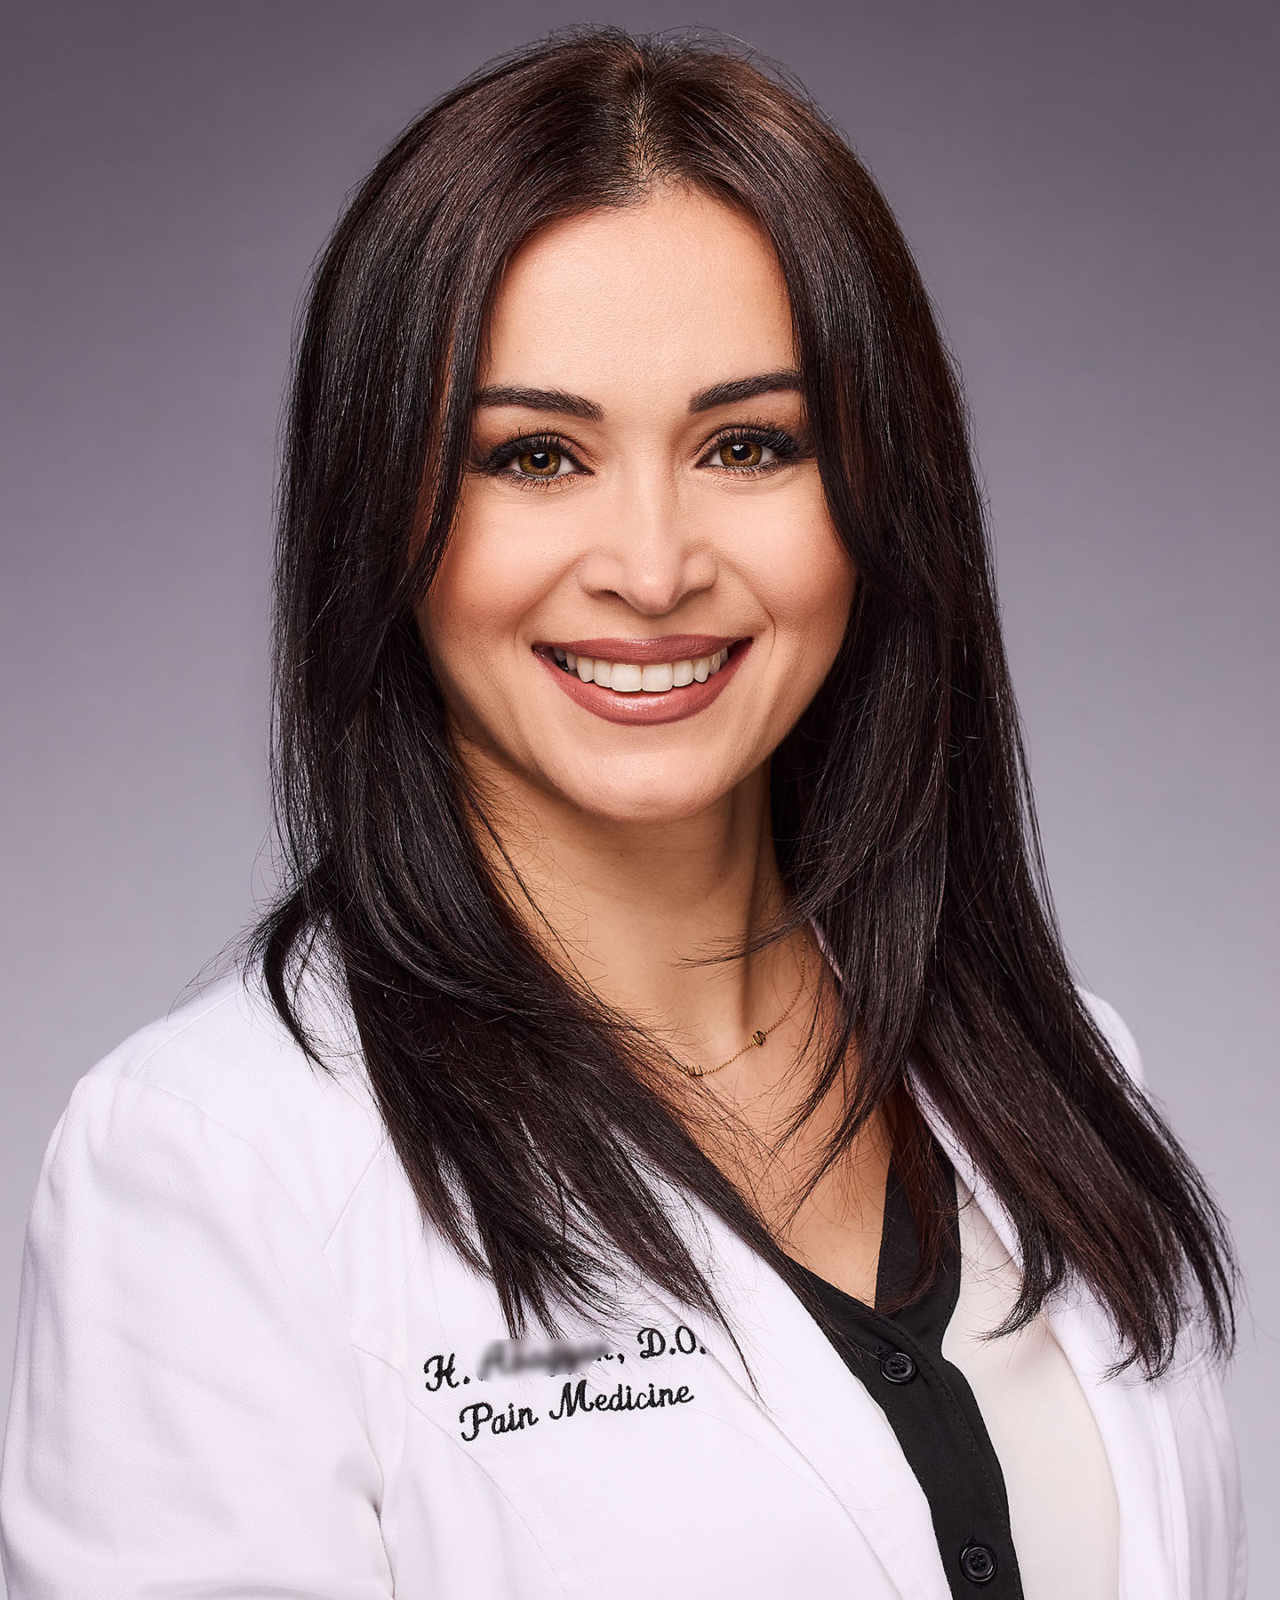 A woman doctor in an executive headshot in Los Angeles made by The Light Committee